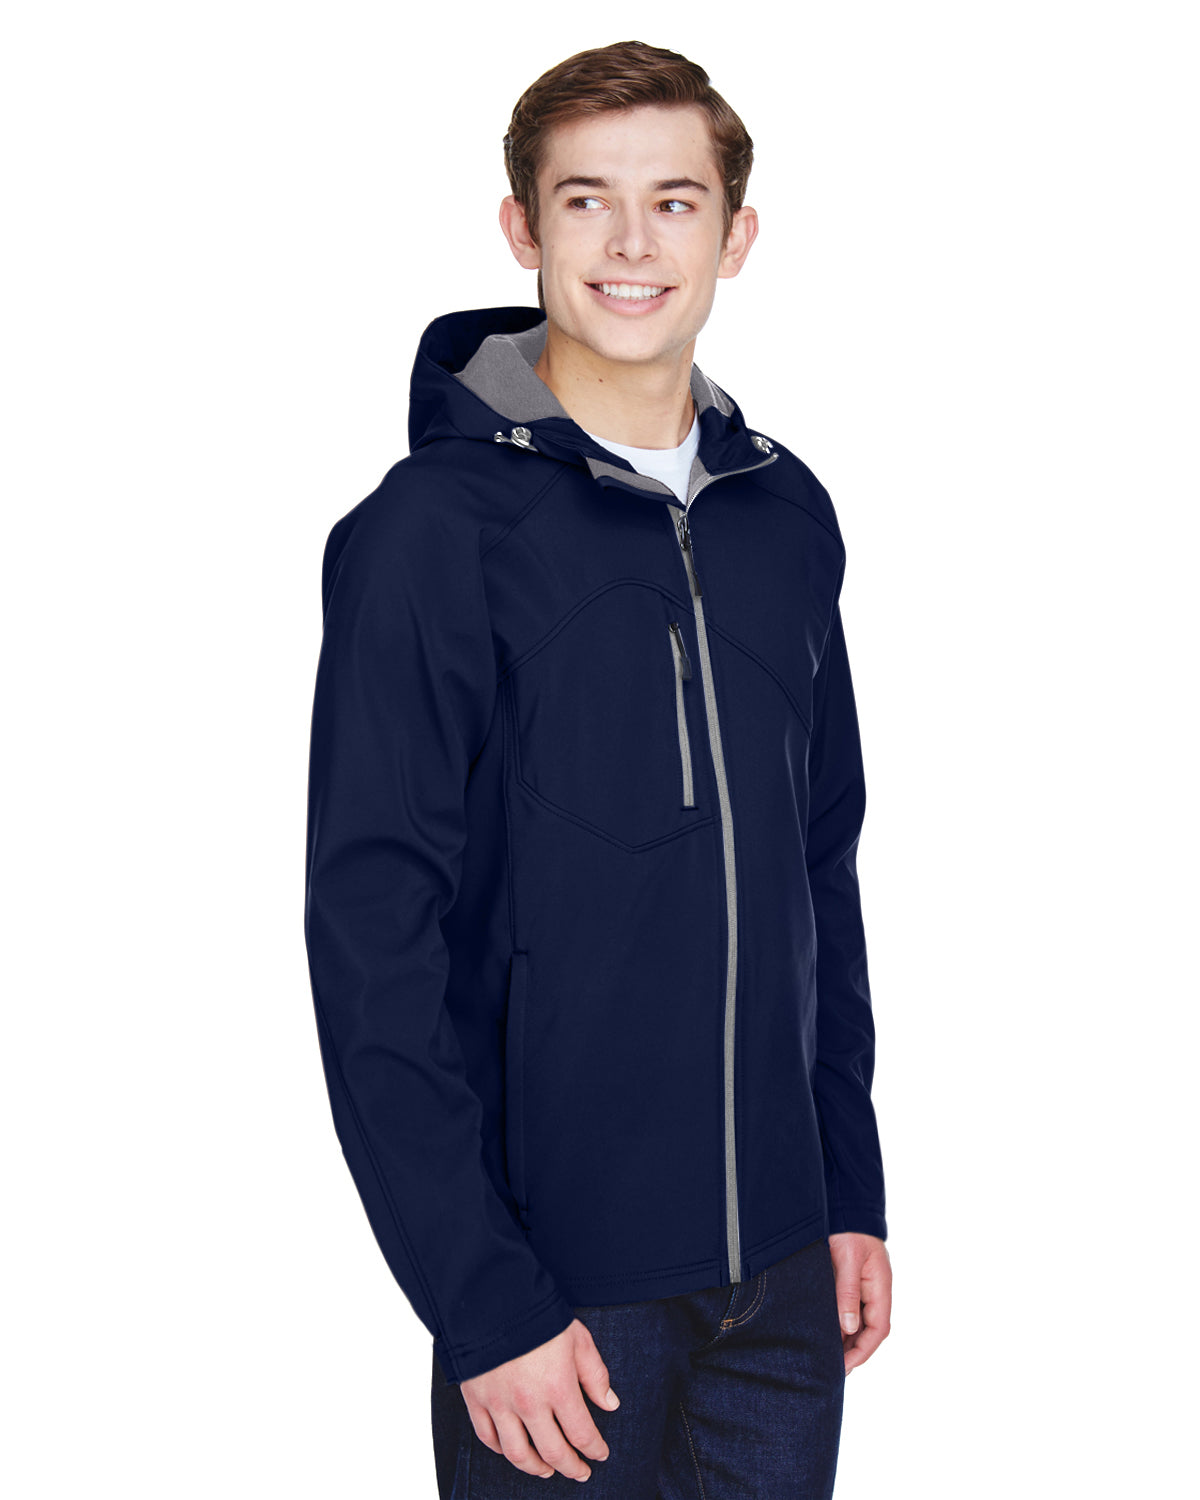 Ash City® North End Men's Prospect Two-Layer Fleece Bonded Soft Shell Hooded Jacket